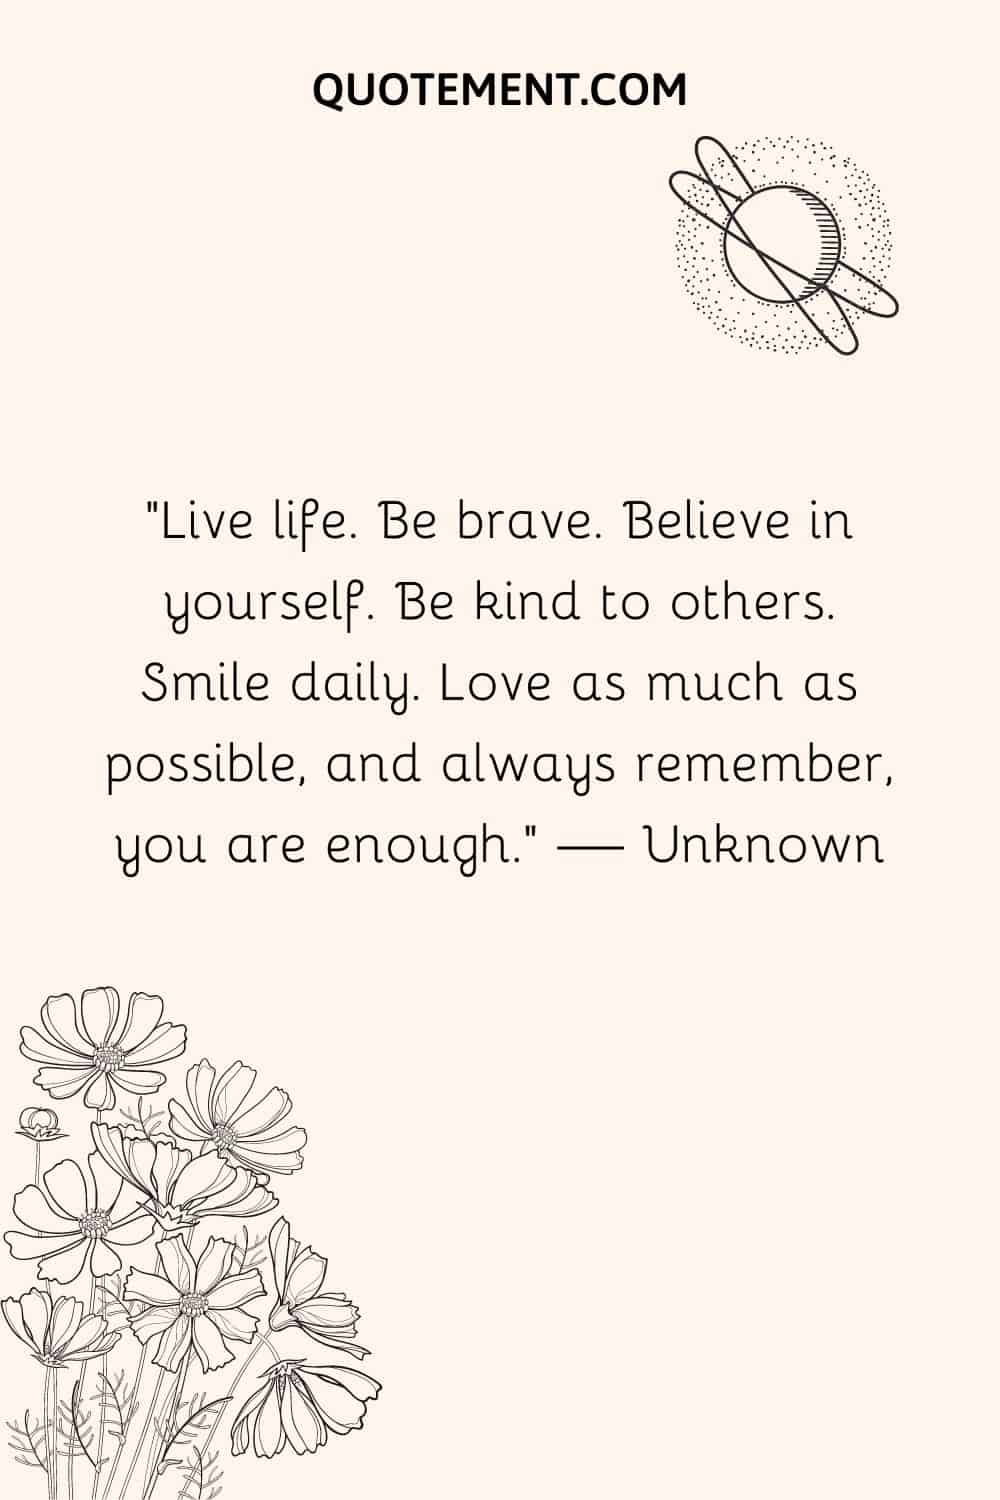 Live life. Be brave. Believe in yourself.